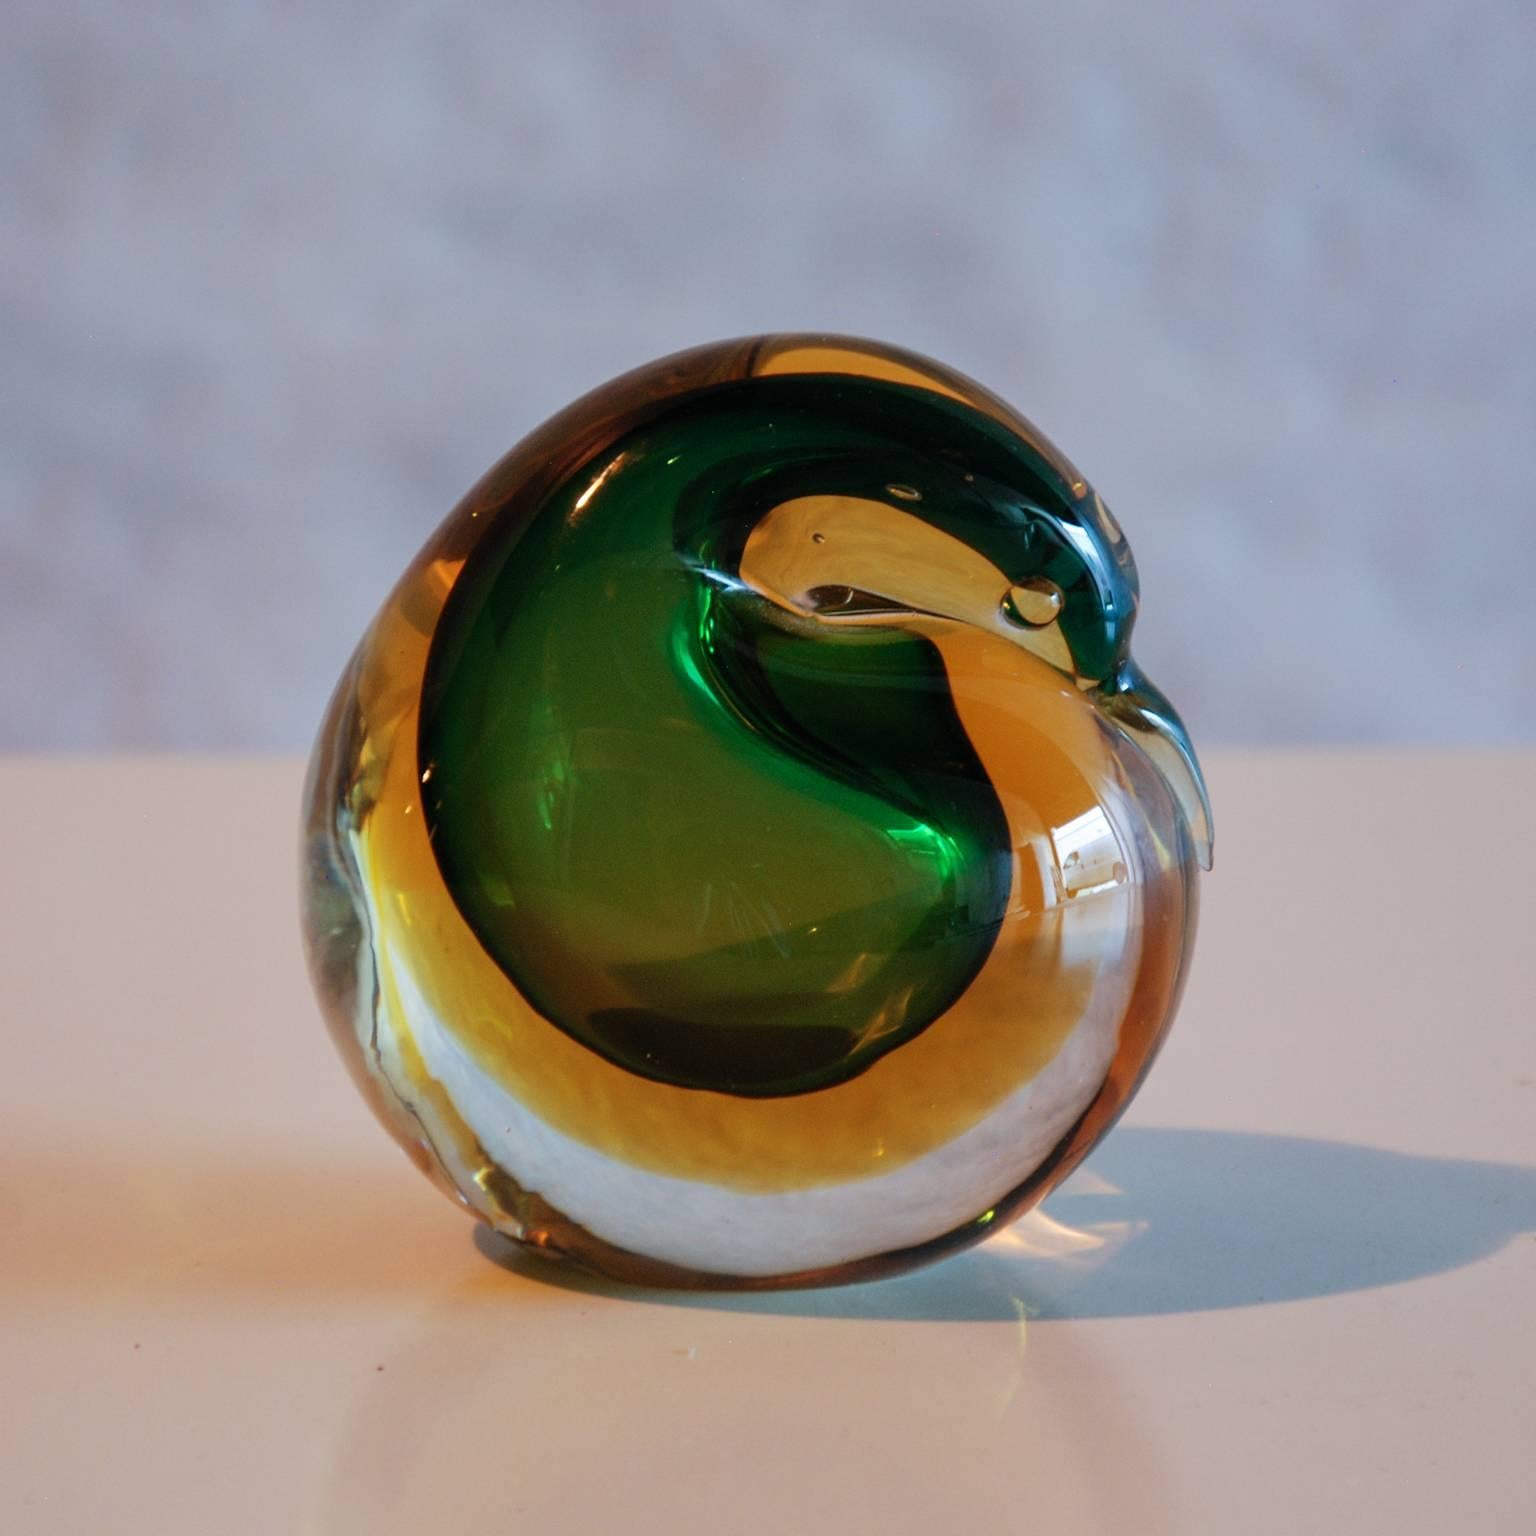 A whimsical art glass bird at rest by Flavio Poli for Seguso Vetri D'Arte.  The bird is executed in the sommerso technique with green and yellow glass cased in clear.